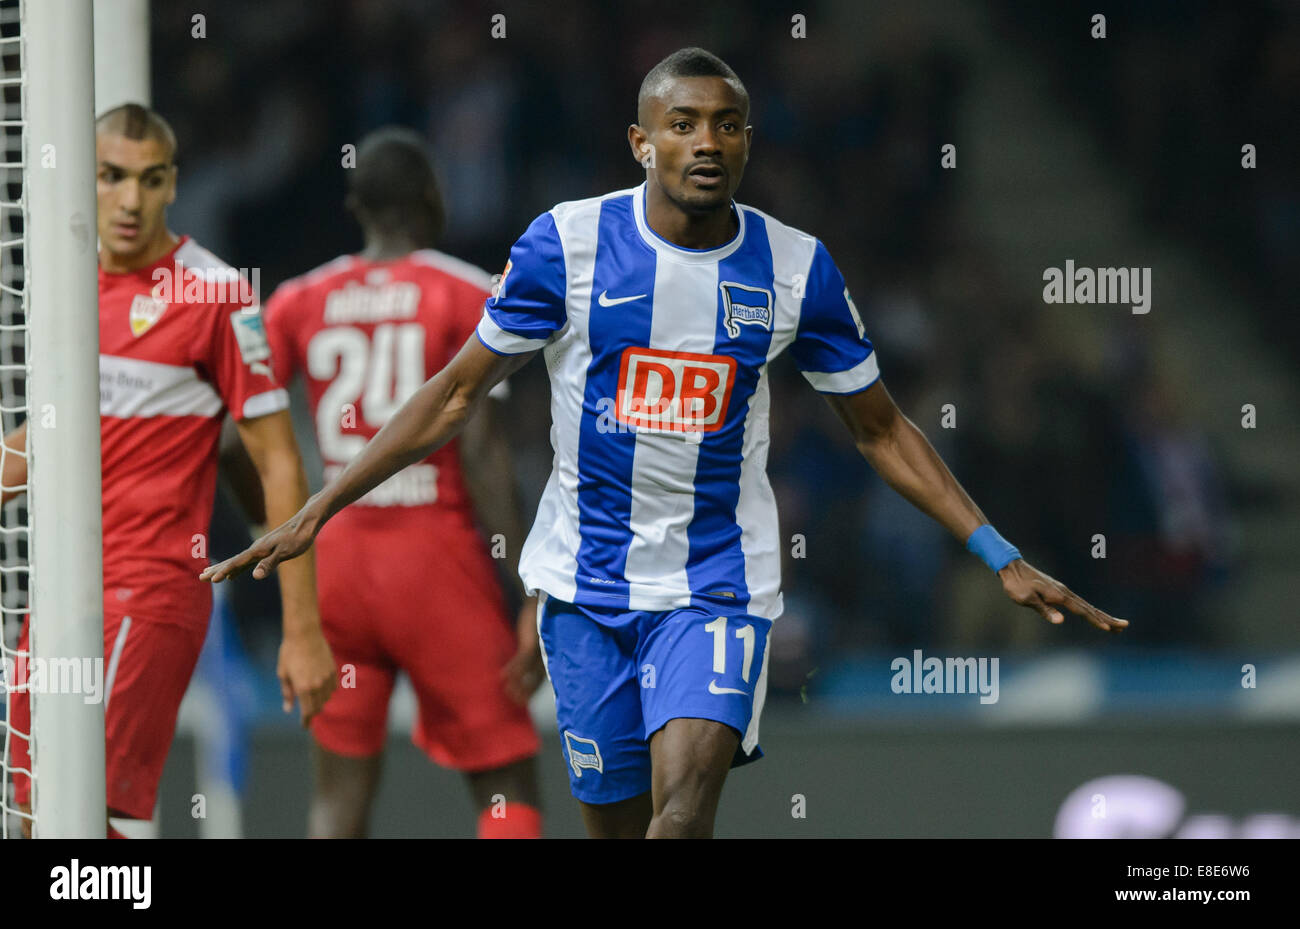 Berlin's Salomon Kalou cheers after his 2:1 goal during the Bundesliga Day 7 soccer match between Hertha BSC and VfB Stuttgart at Olympiastadion in Berlin, Germany, 03 October 2014. Photo: Thomas Eisenhuth/dpa - NO WIRE SERVICE - Stock Photo